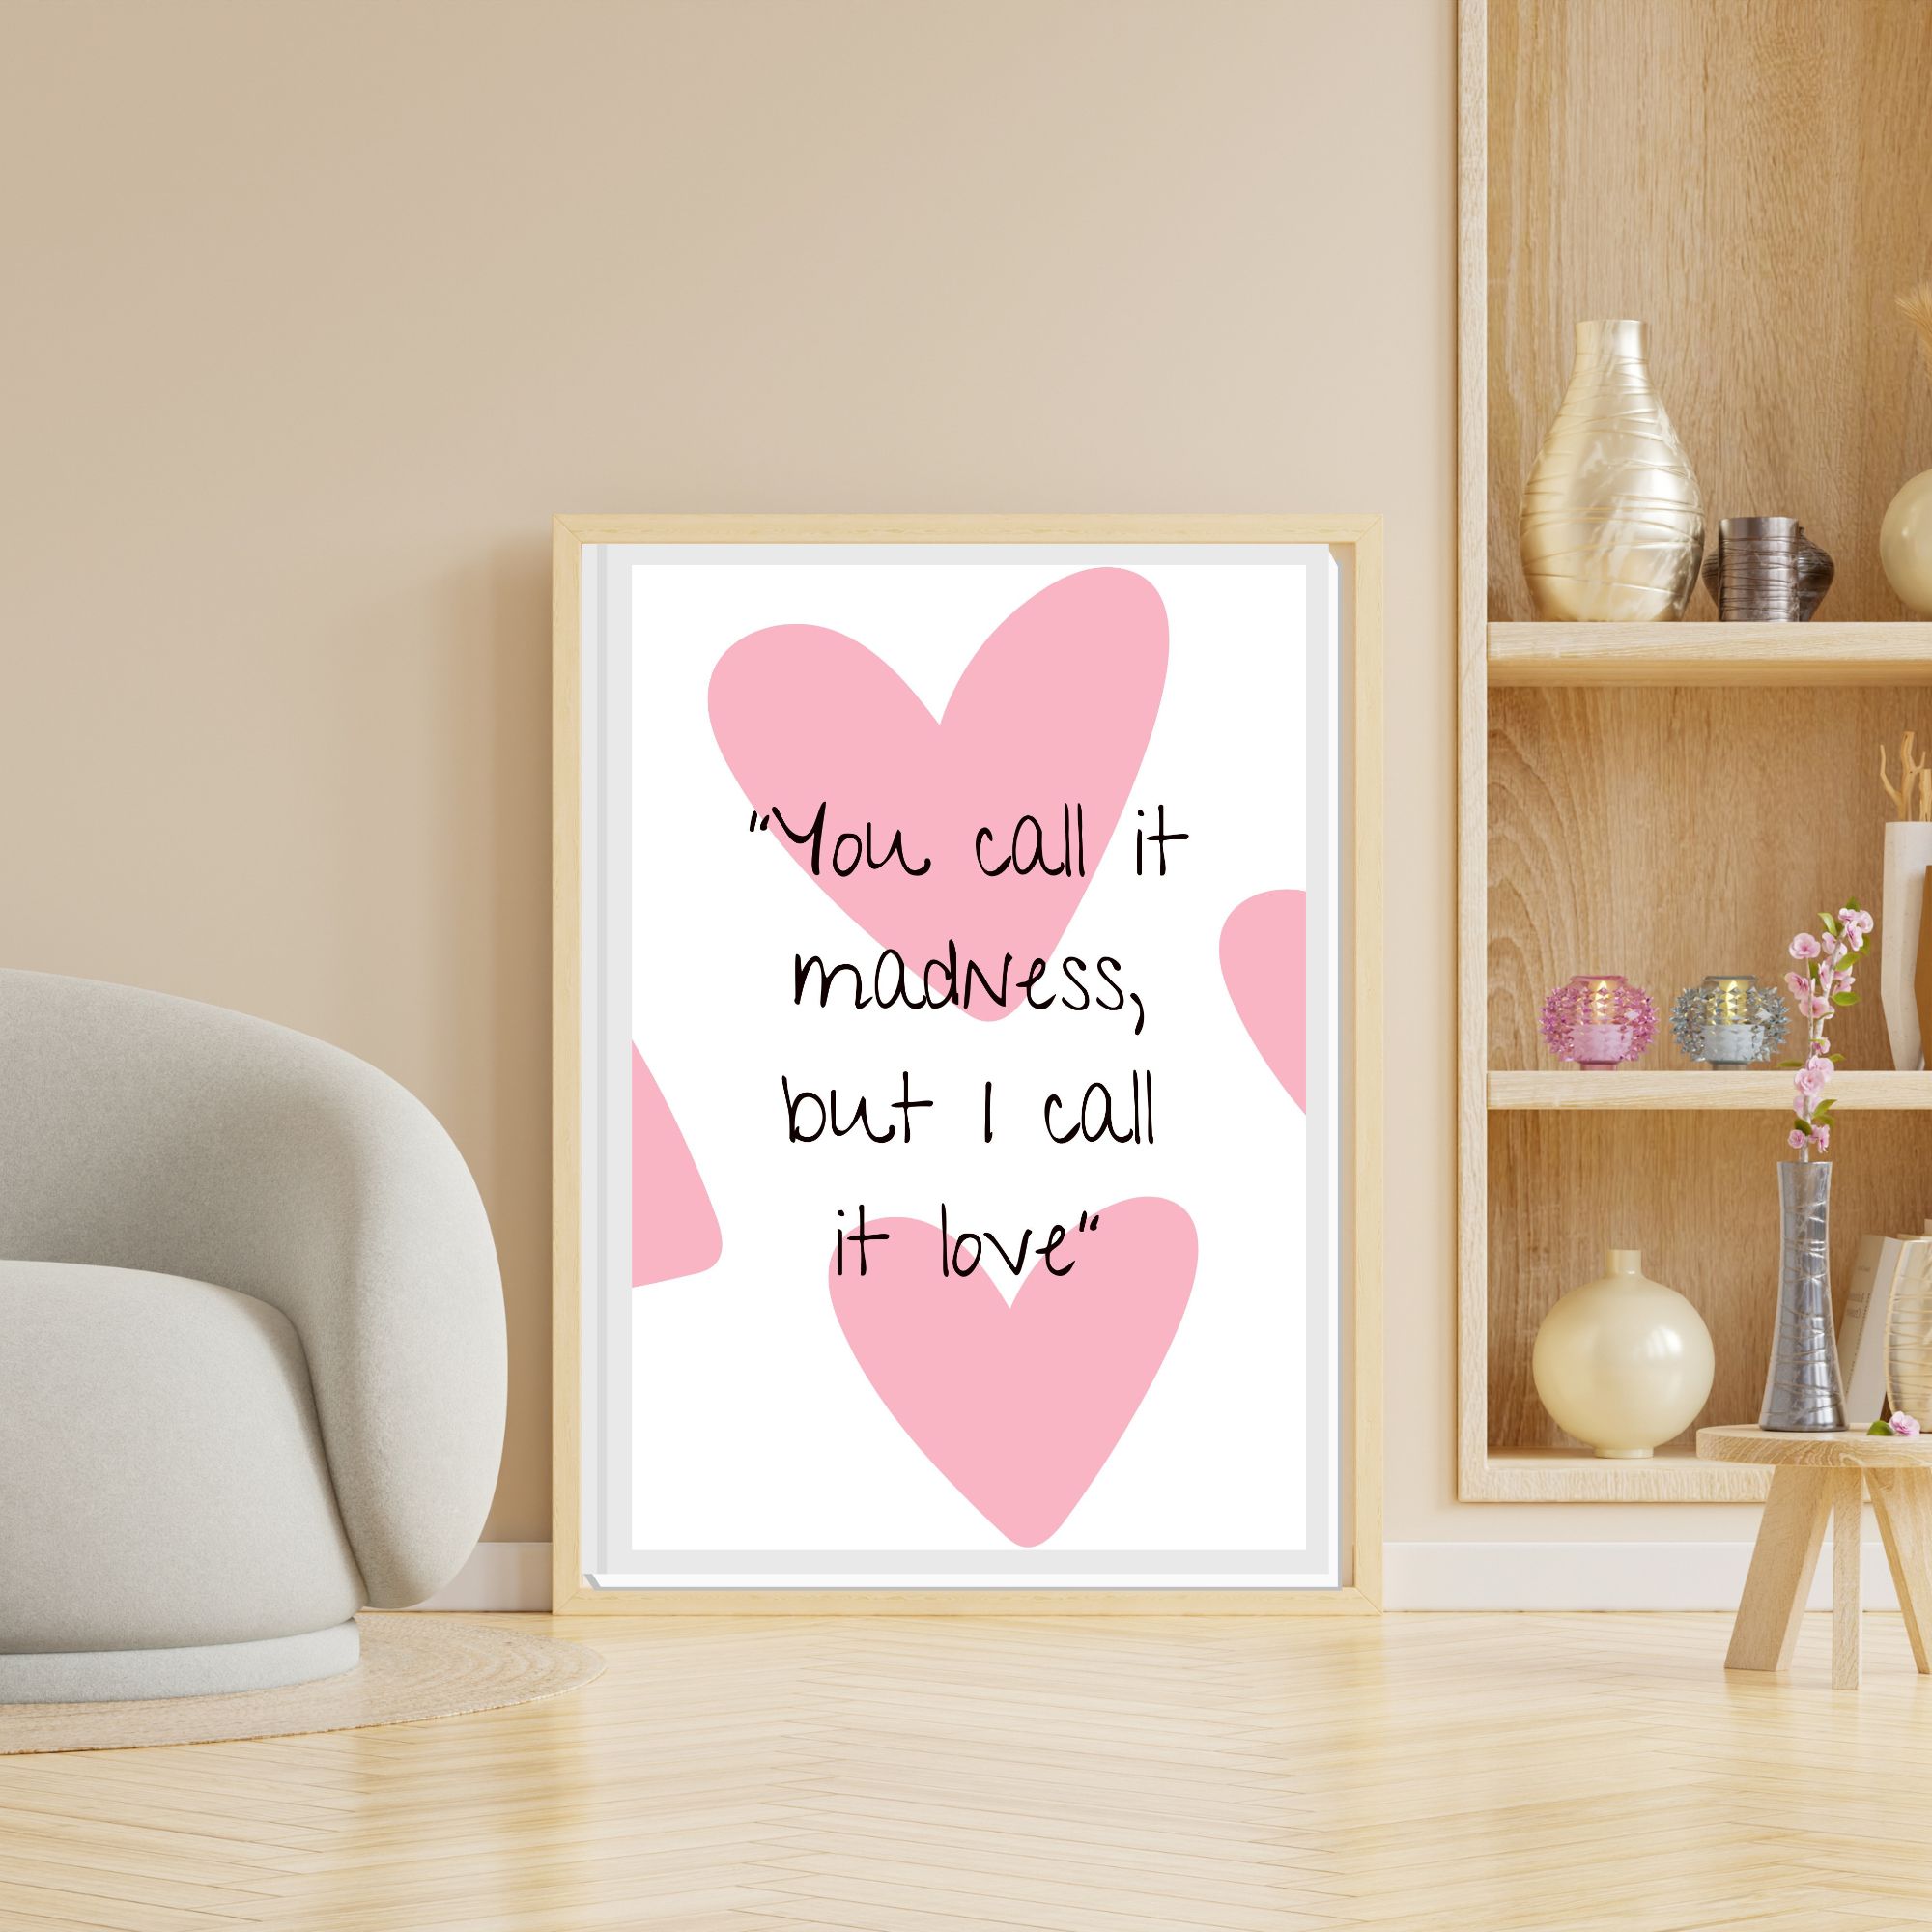 You call it madness, but I call it love - Love Print | Valentine\\\'s Day Decor | Valentine Printable Wall Art | Heart Wall Decor - Digital preview image.